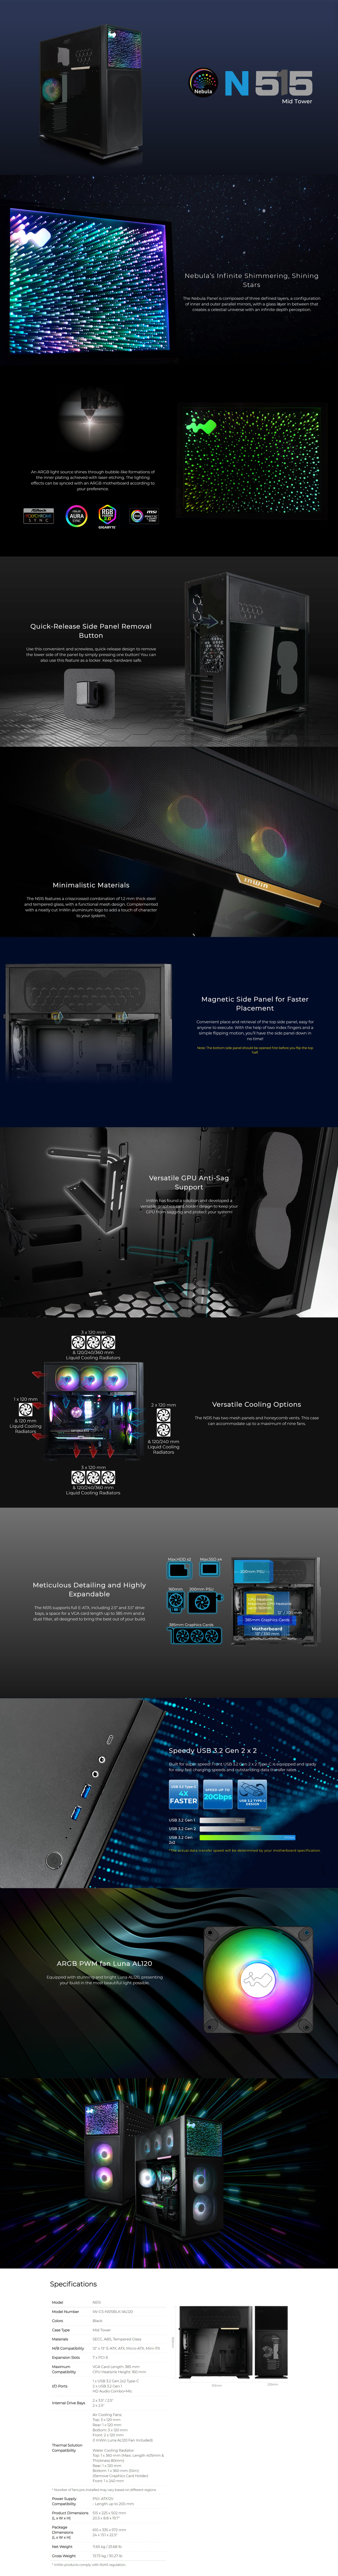 A large marketing image providing additional information about the product InWin N515 Nebula ARGB Mid Tower Case - Additional alt info not provided